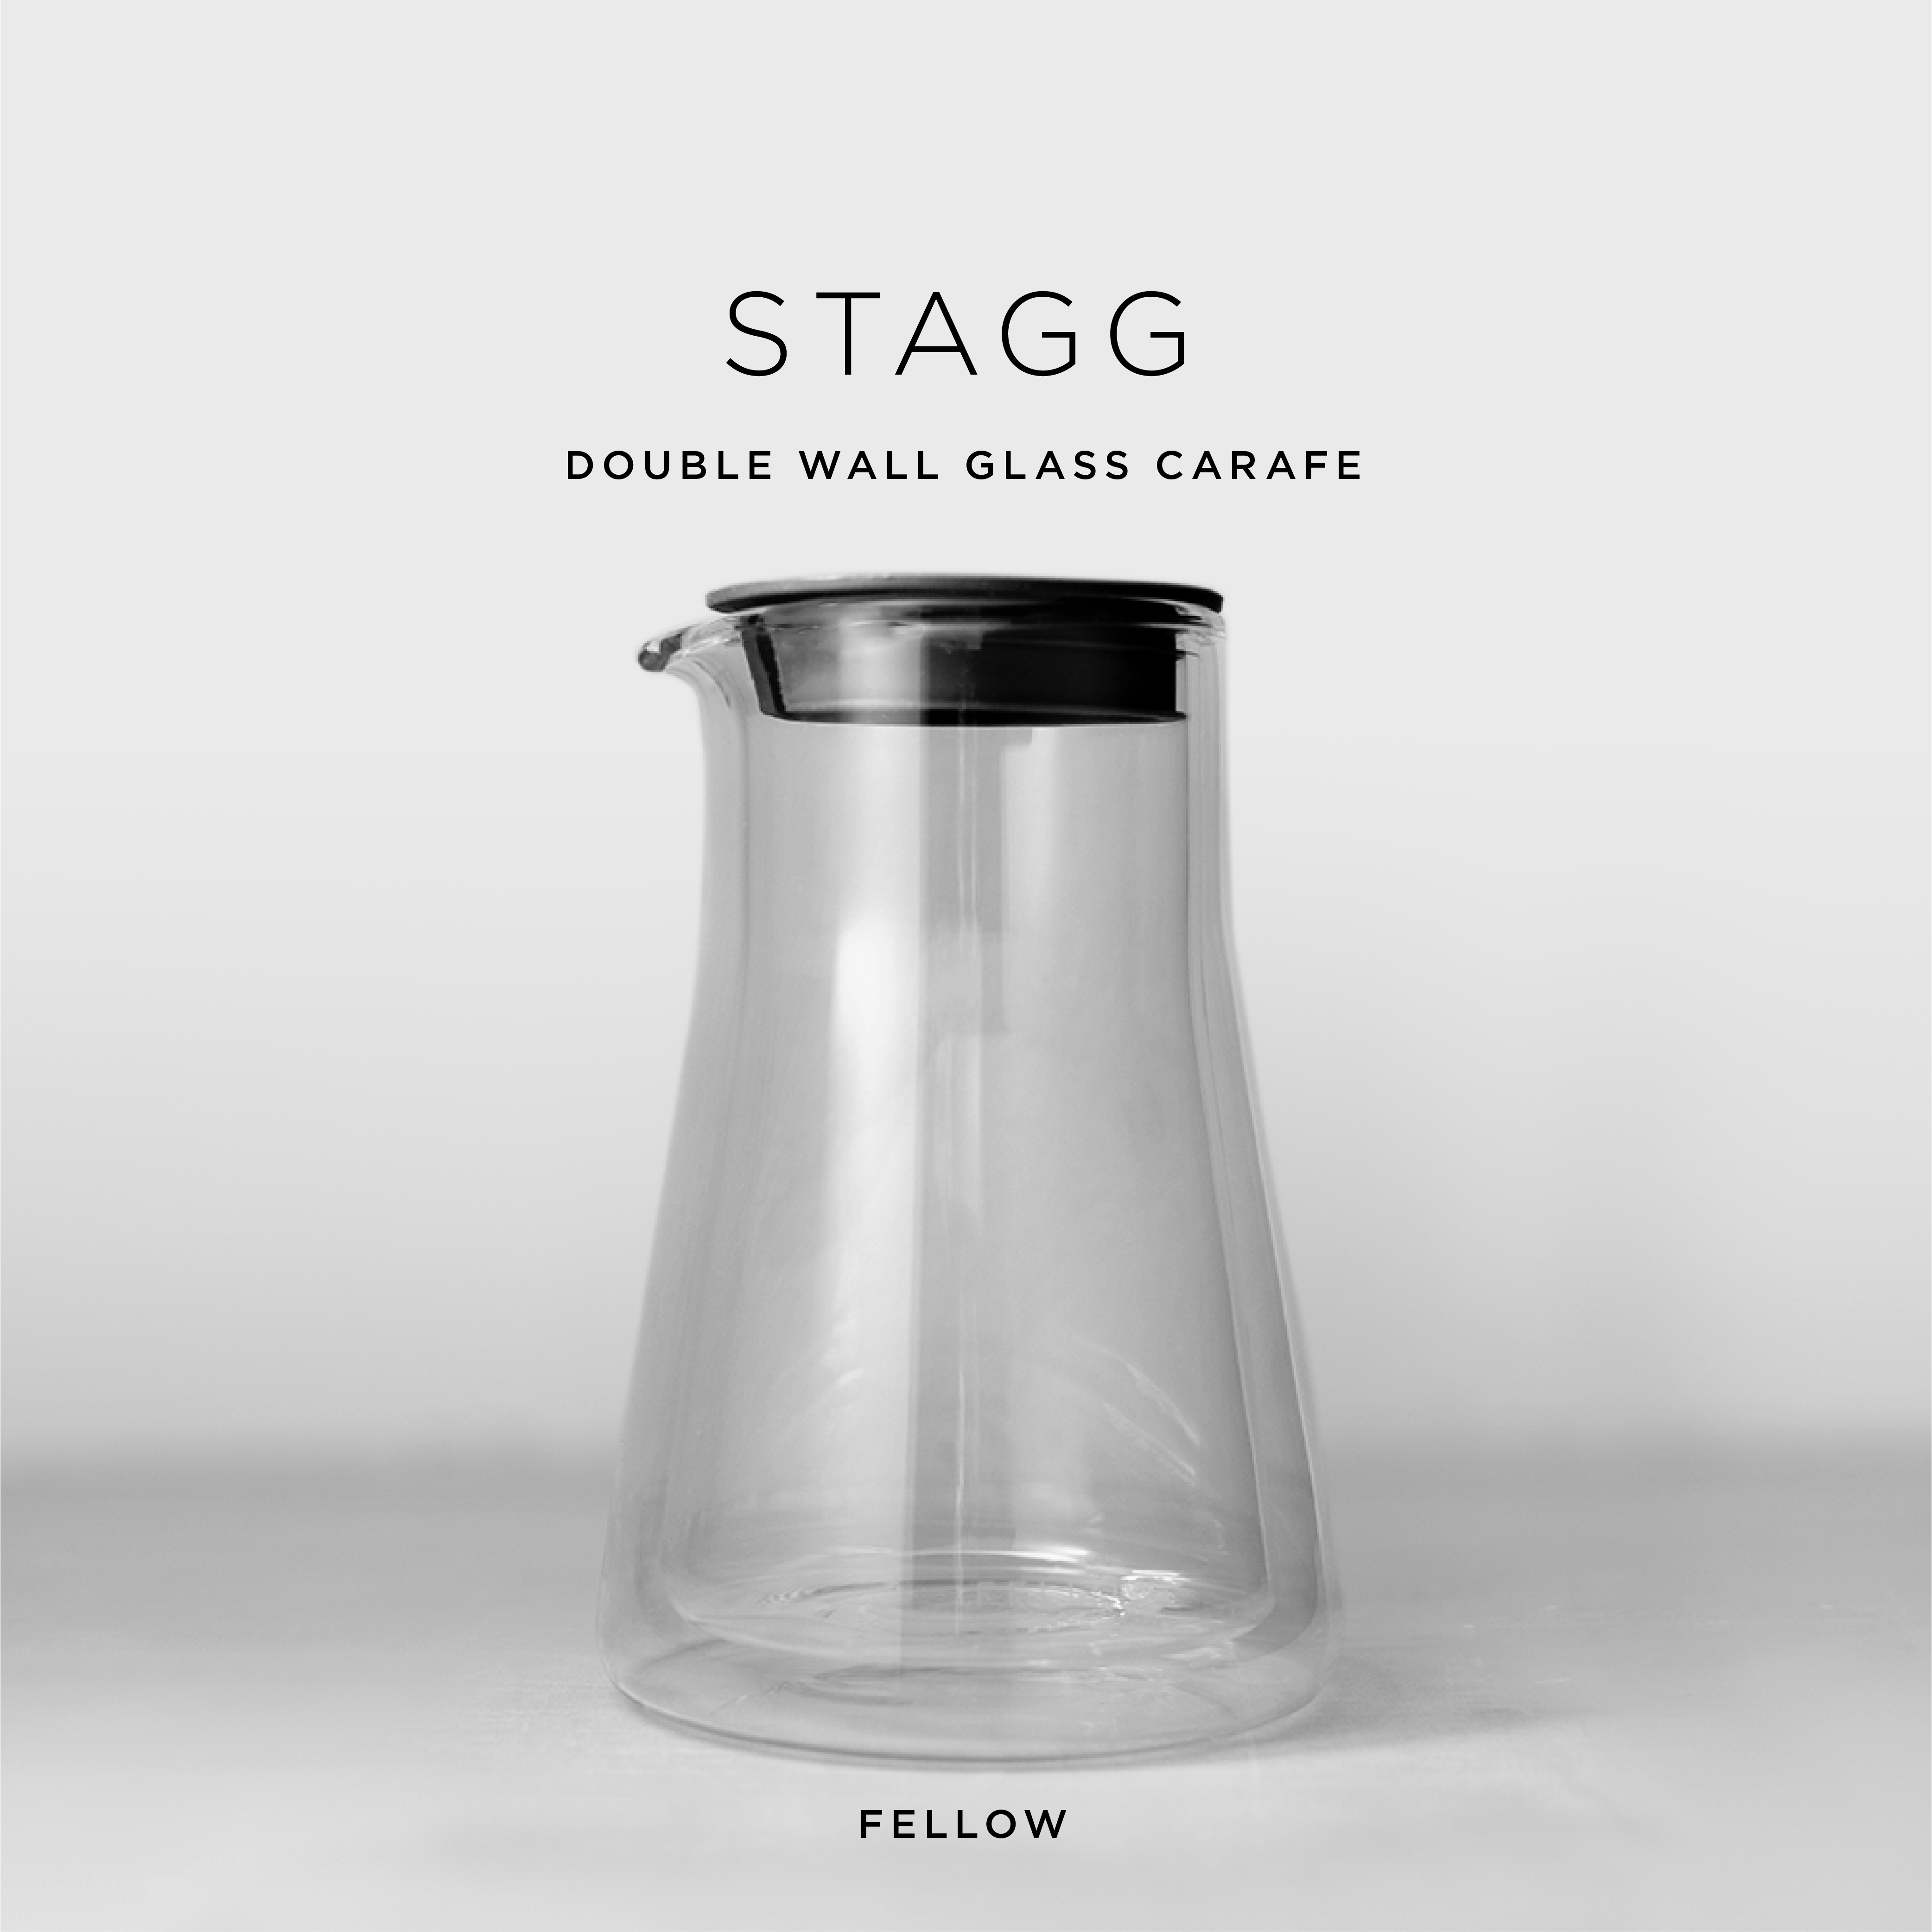 Fellow's Stagg Double Wall Carafe